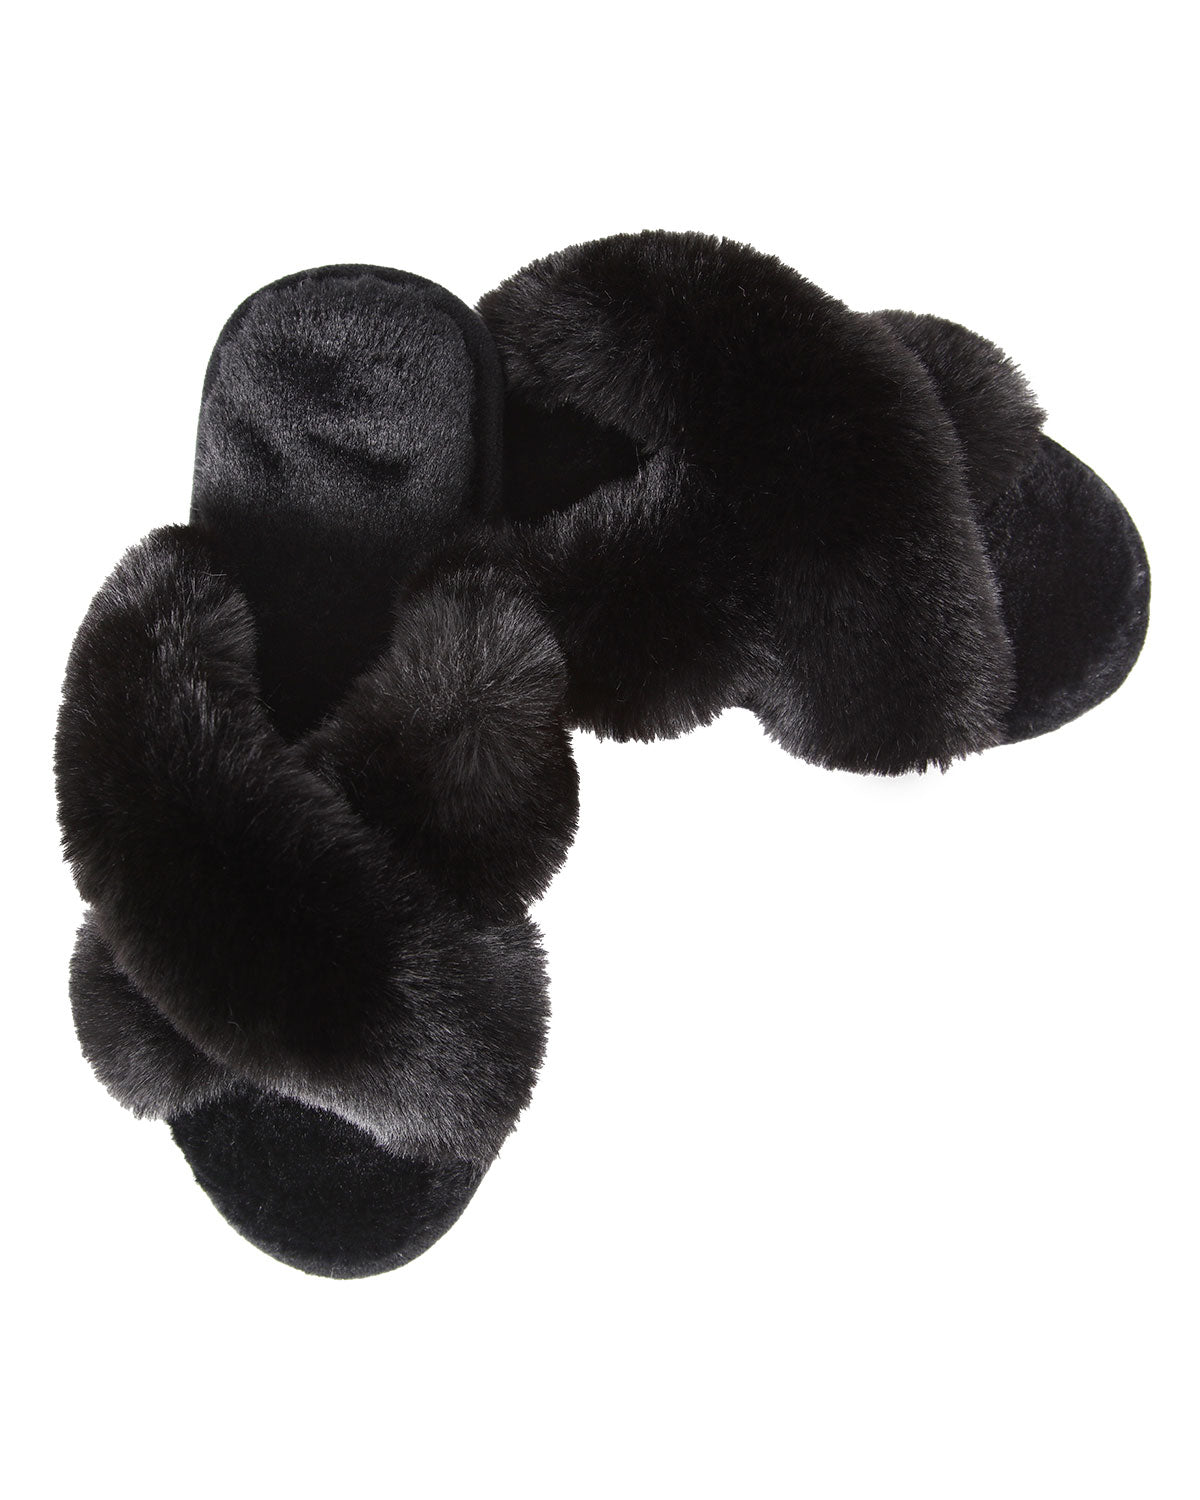 Luxe Fur Plush Slippers